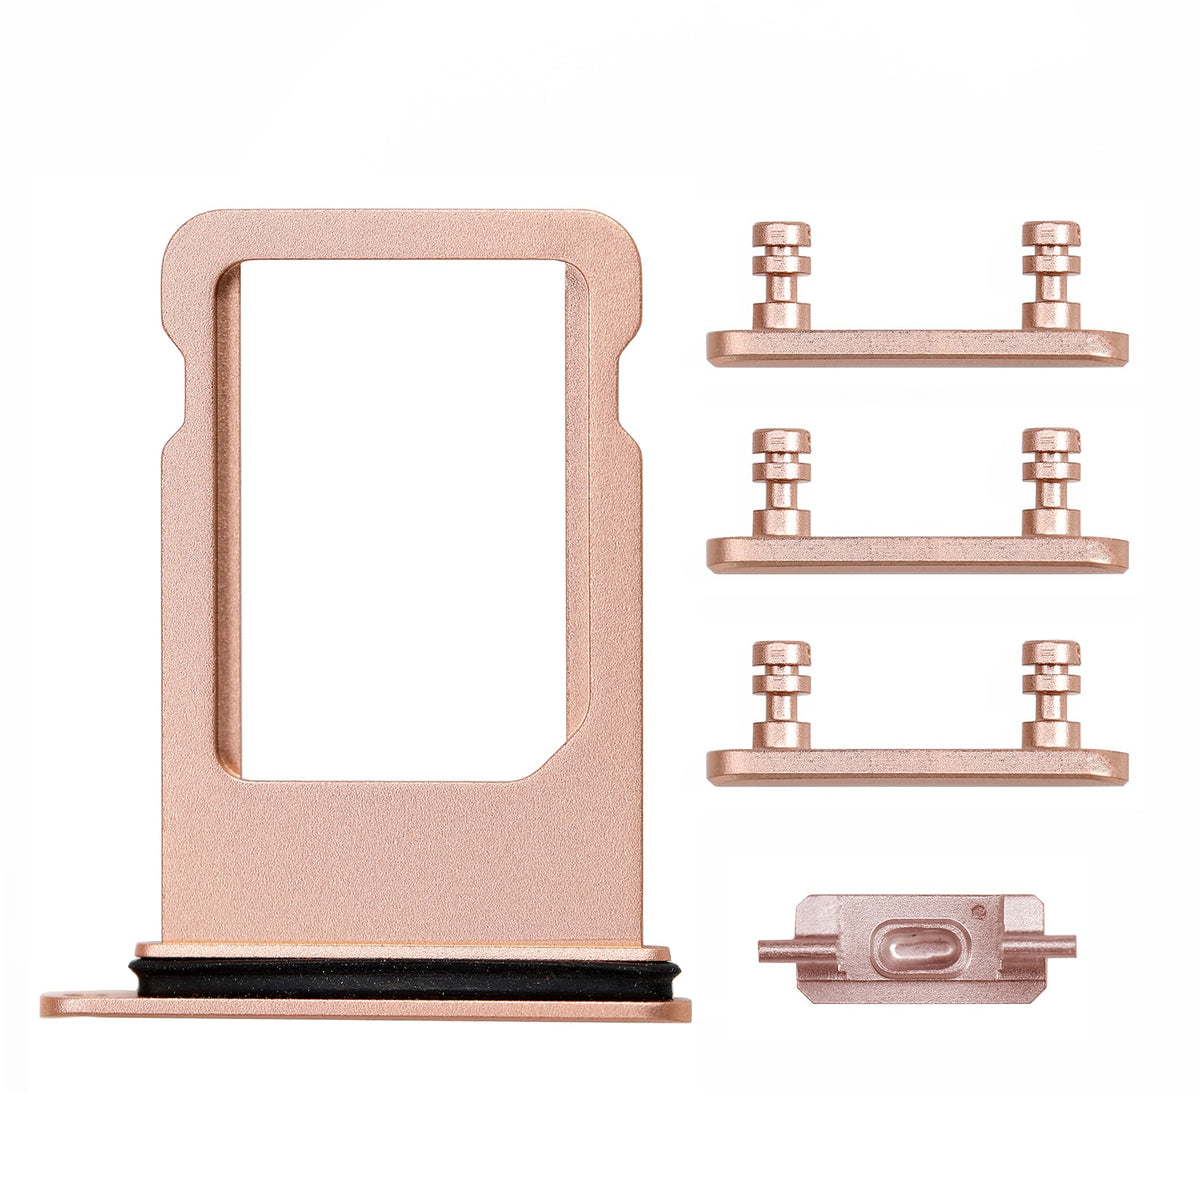 GOLD SIDE BUTTONS SET WITH SIM TRAY FOR IPHONE 8/SE 2ND/SE 3RD